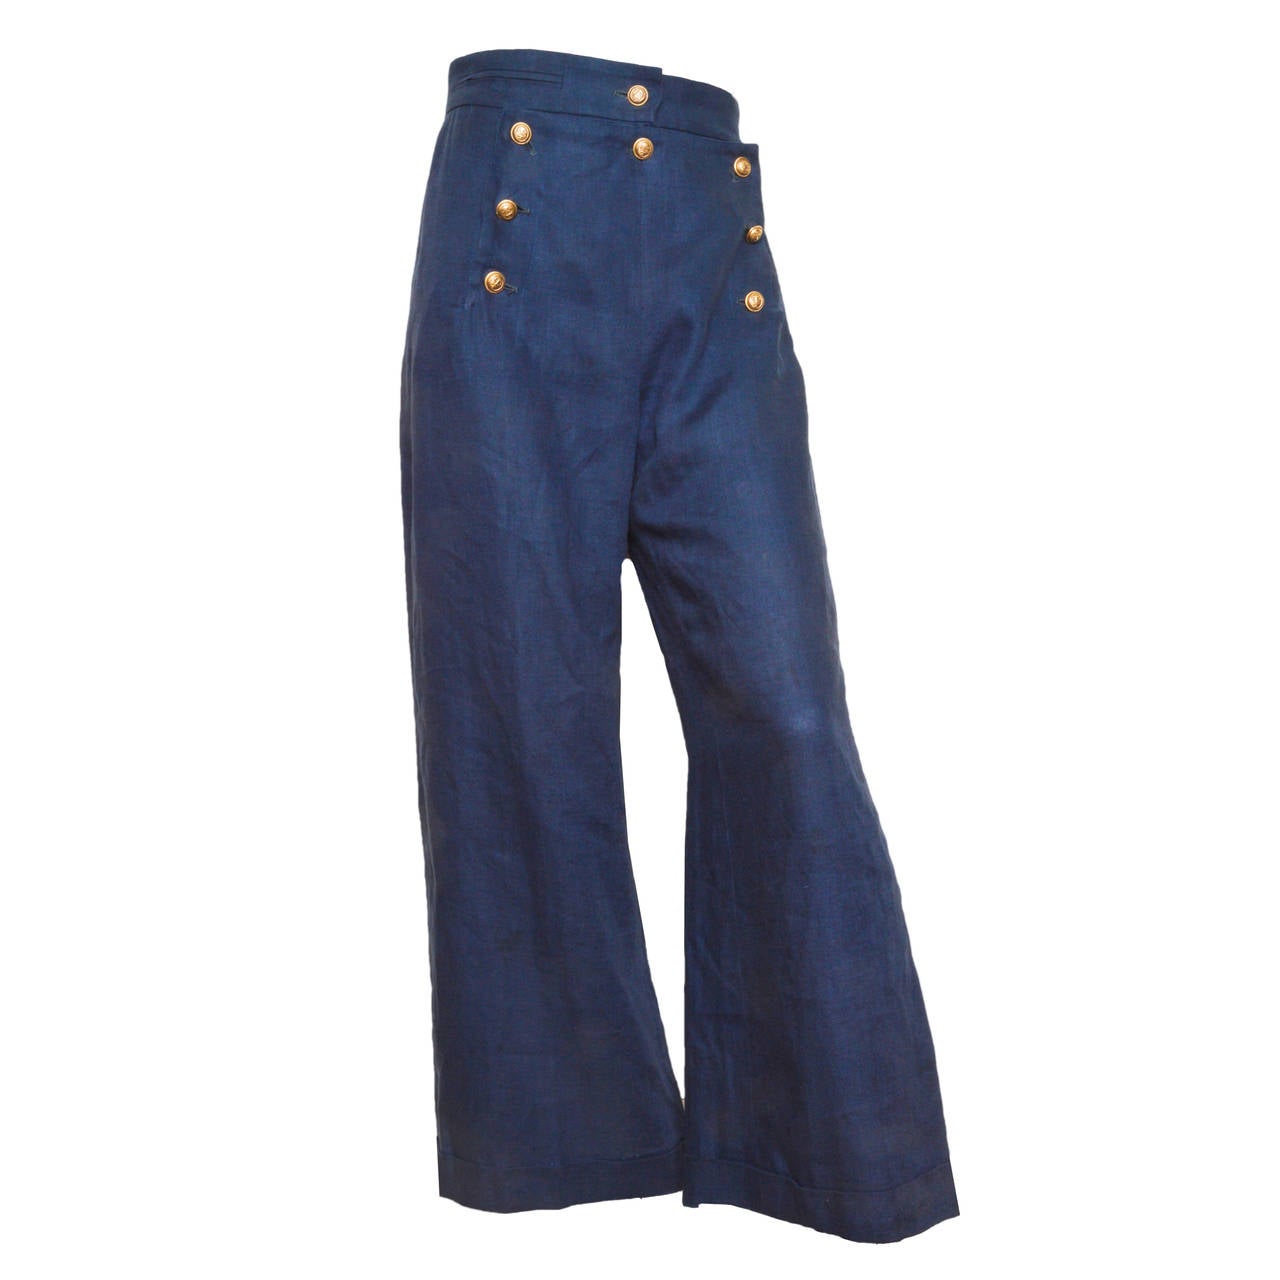 Moschino Couture! “Cruise Me Baby” Navy Sailor Pants